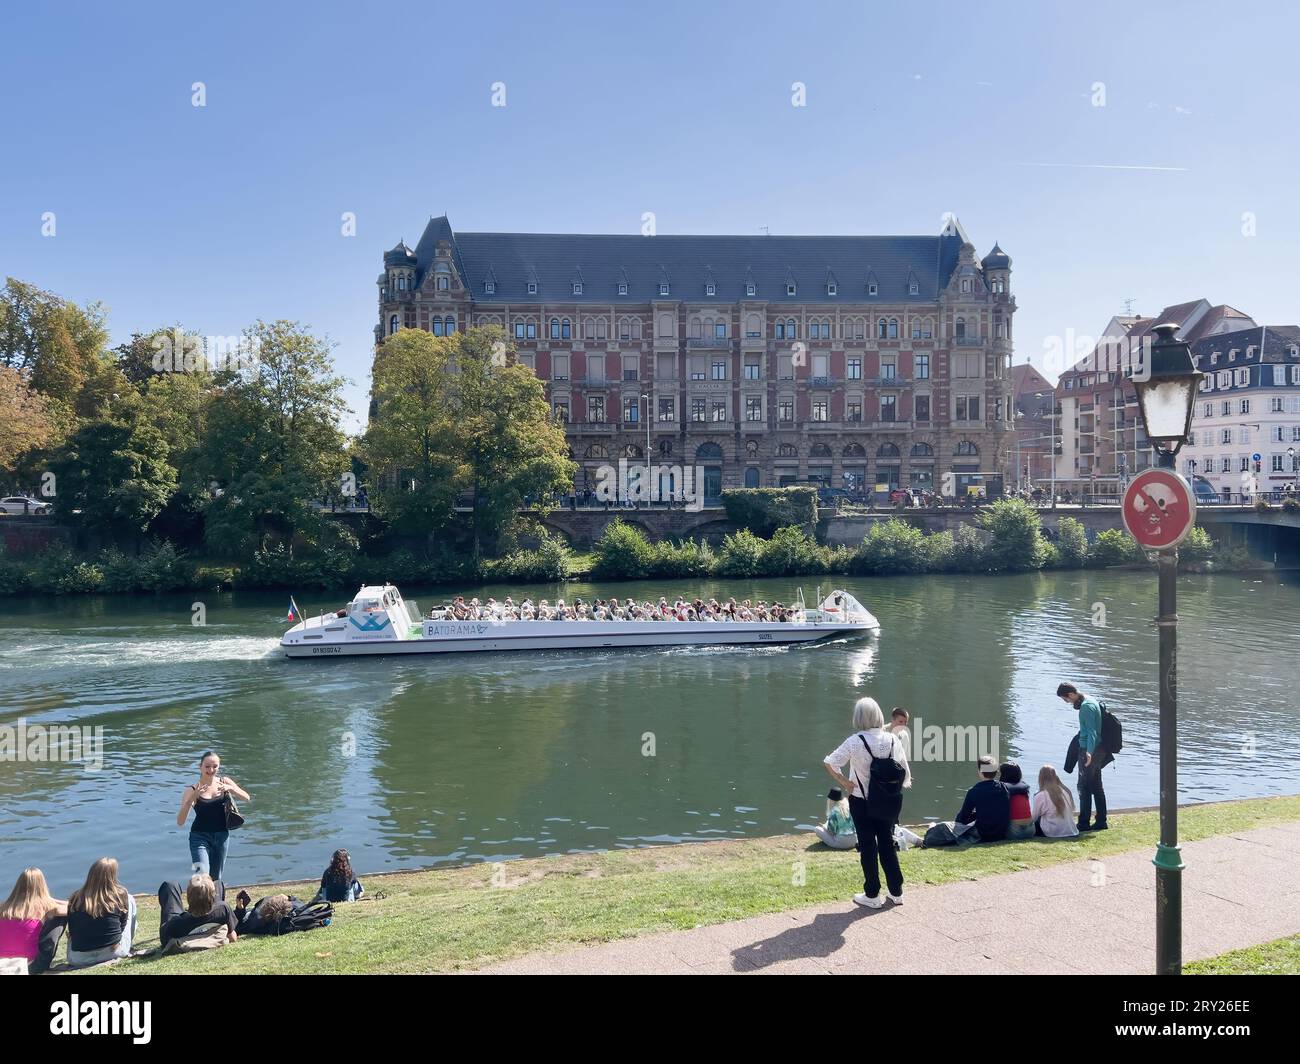 Strasbourg, France - Sep 27, 2023: On a bright summer day, the Ill River in  Strasbourg is bustling with Batorama tourist boats, while the impressive  Residence Universitaire Gallia student dormitory stands majestically